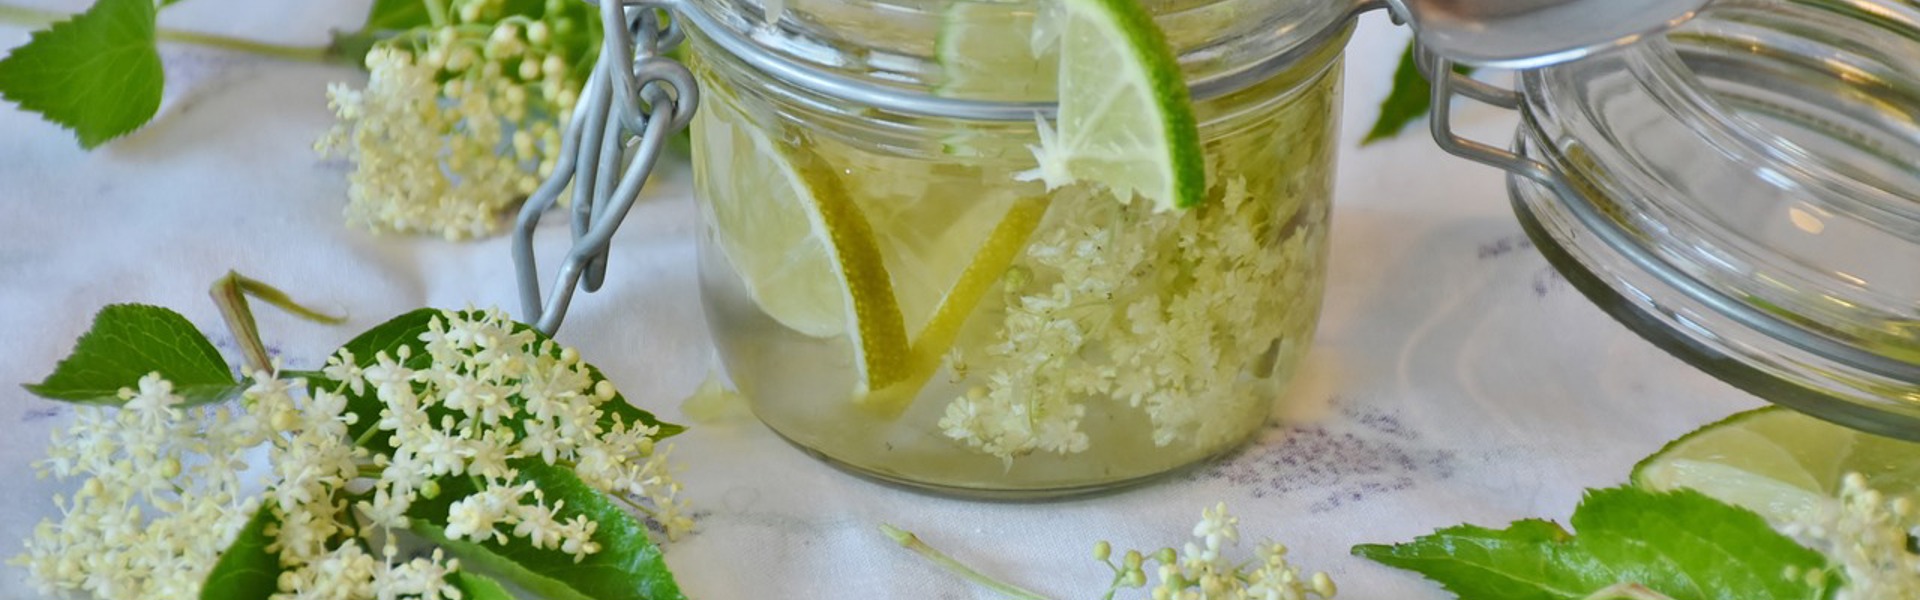 a close up of homemade elderflower cordial made by Rachel Moore